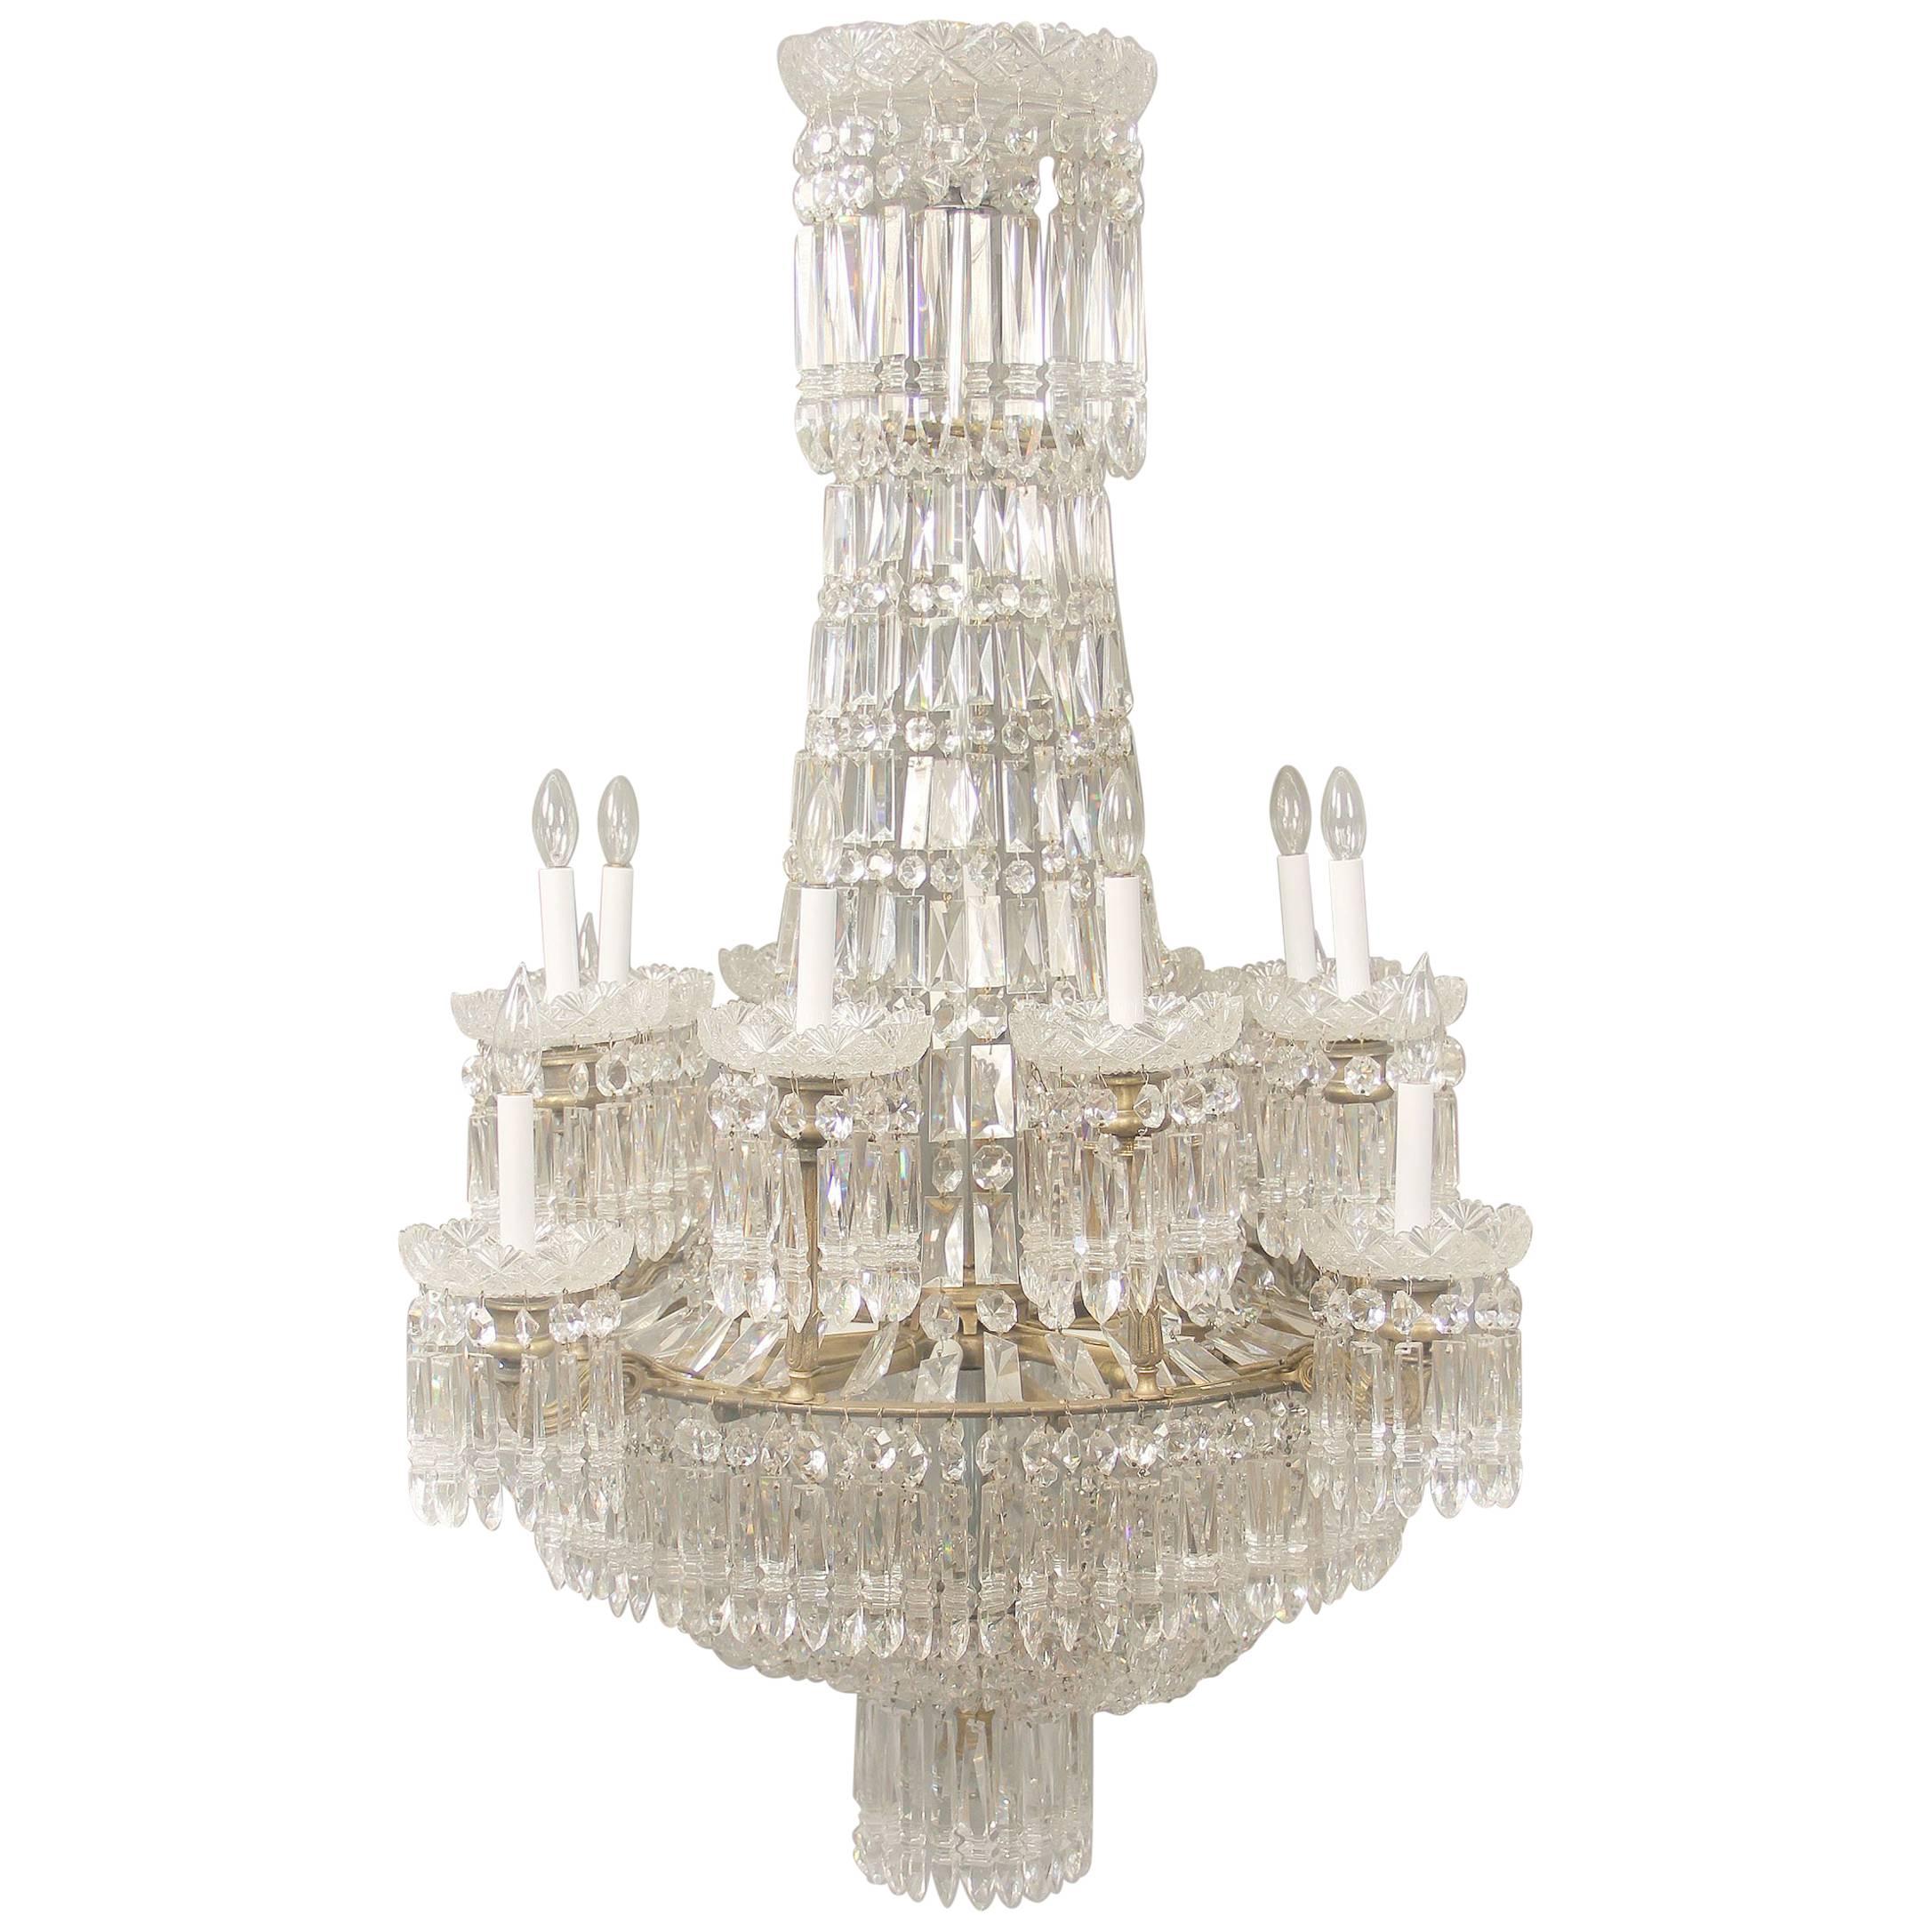 Exceptional Early 19th Century Waterford Crystal Eighteen-Light Chandelier For Sale